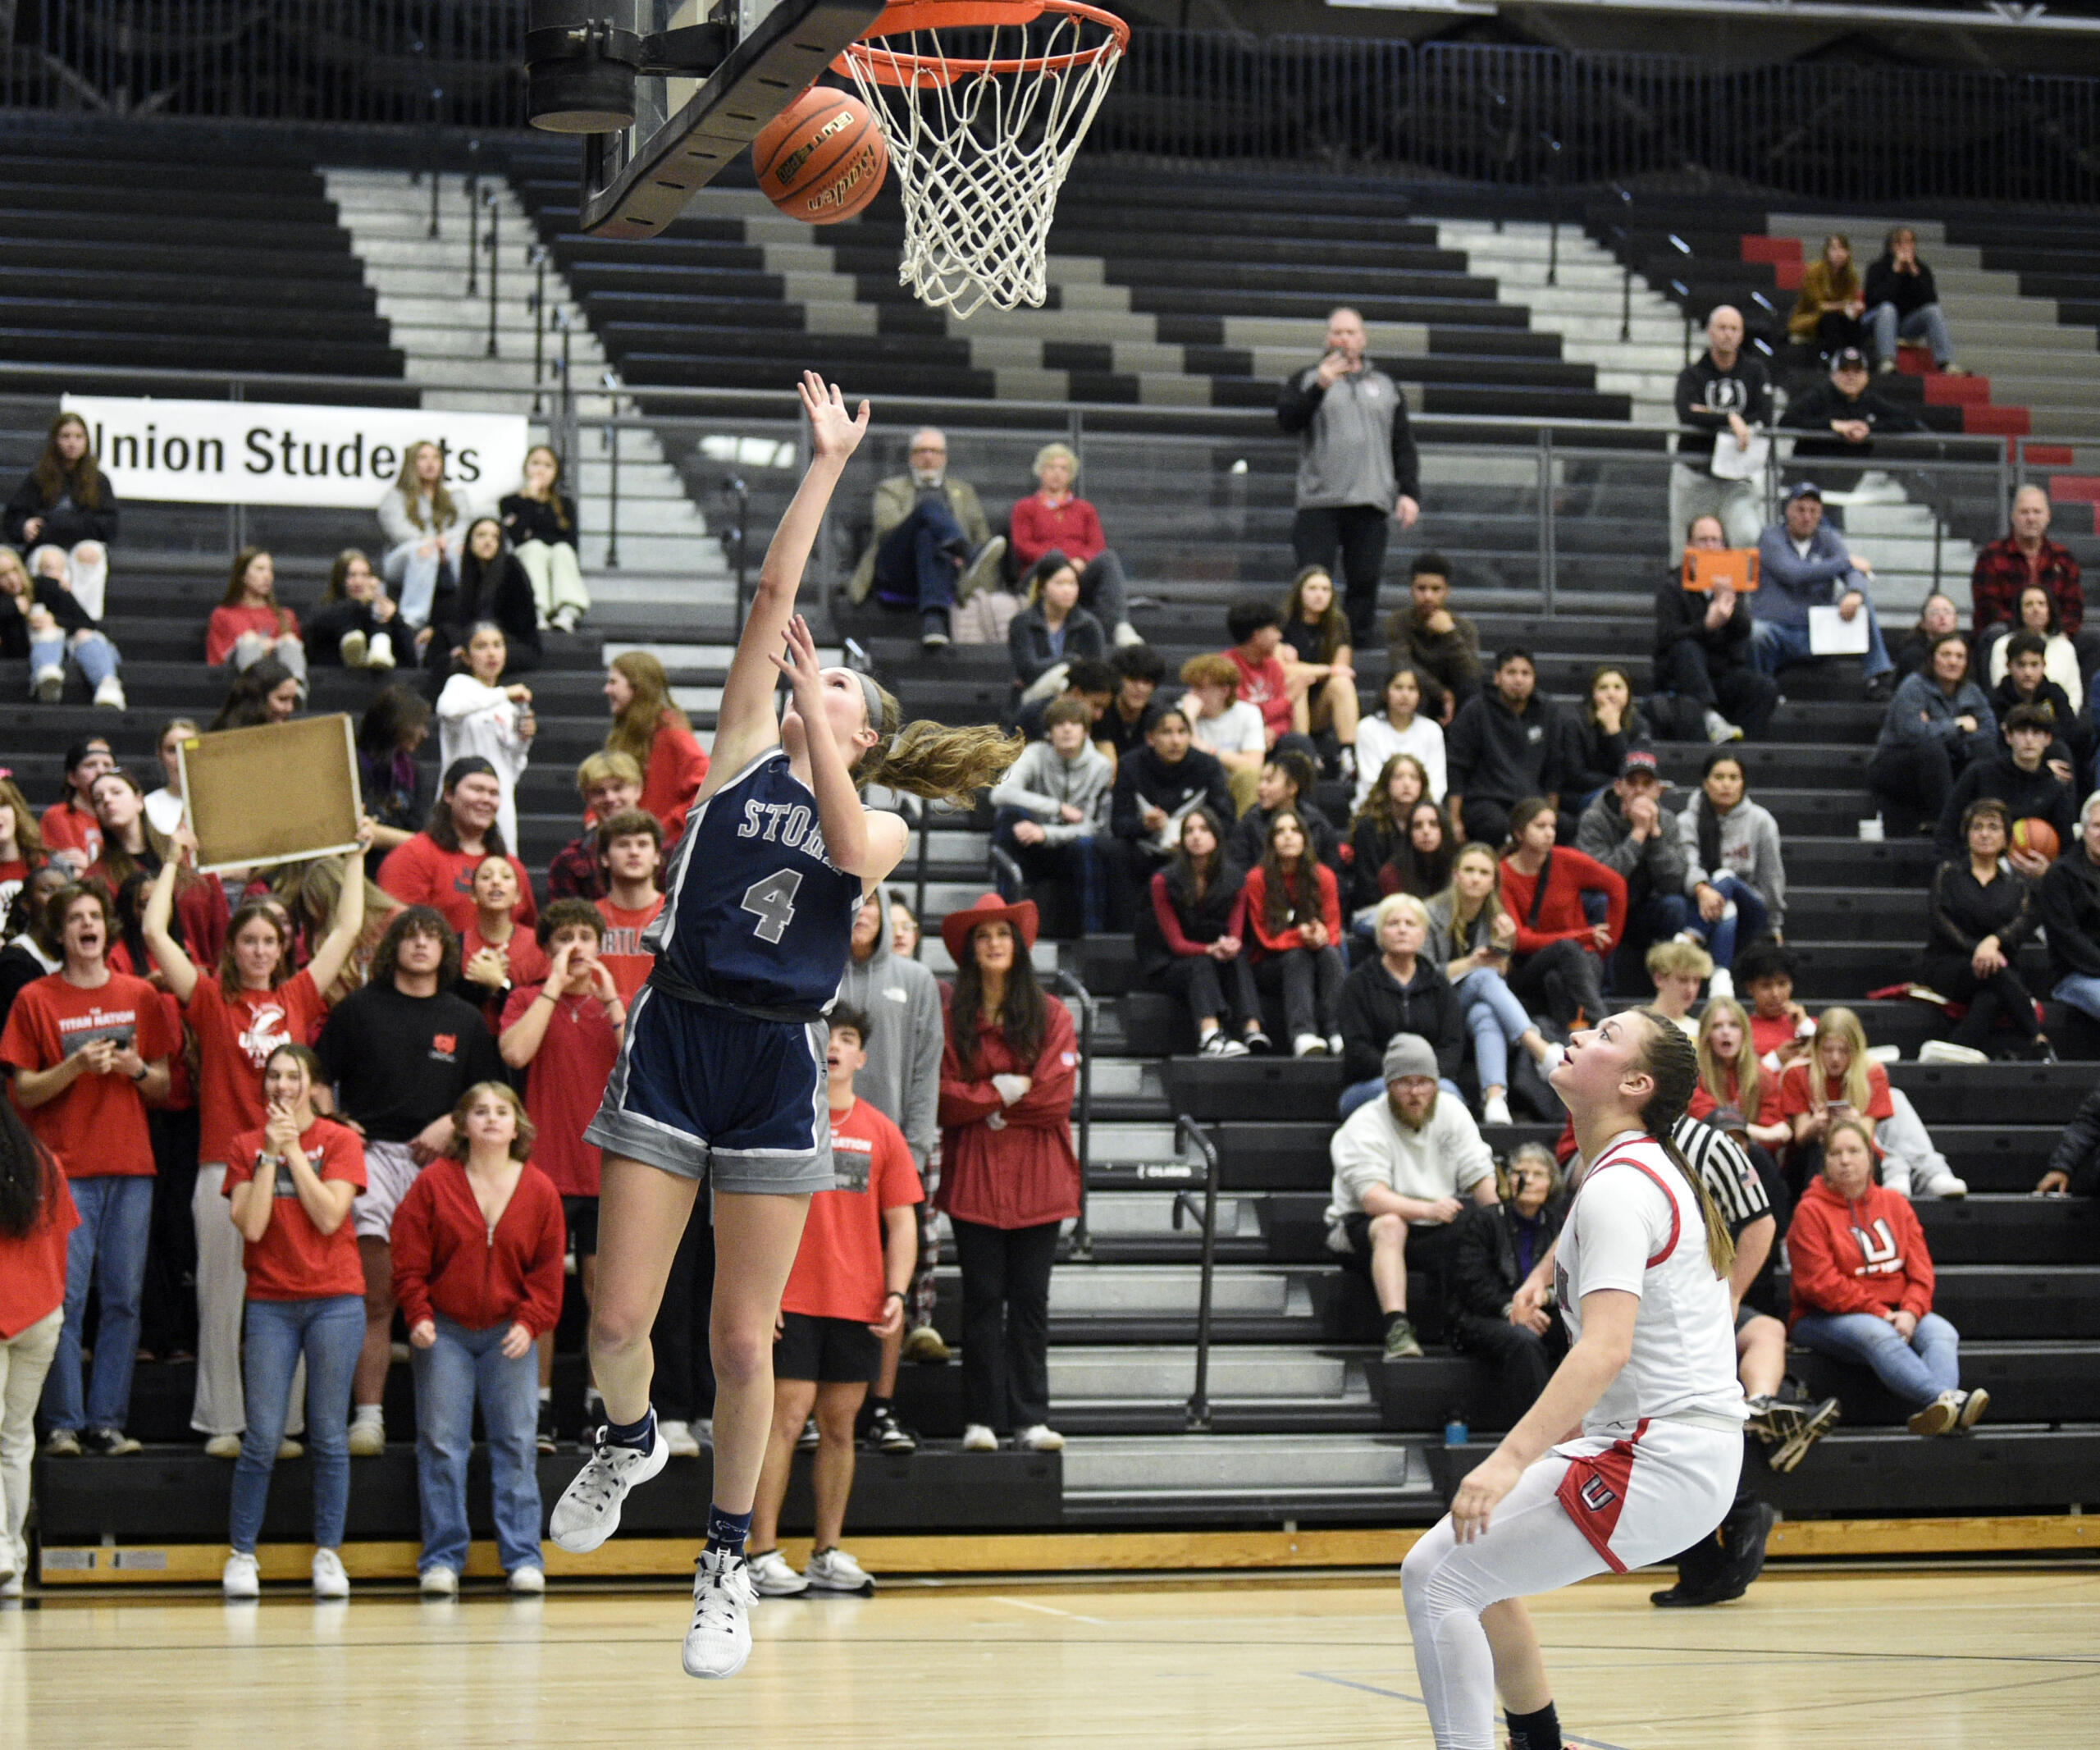 Skyview’s Sam Groesbeck, left, puts in a layup following a steal in the open court against Union on Tuesday, Feb. 7, 2023, at Union High School.